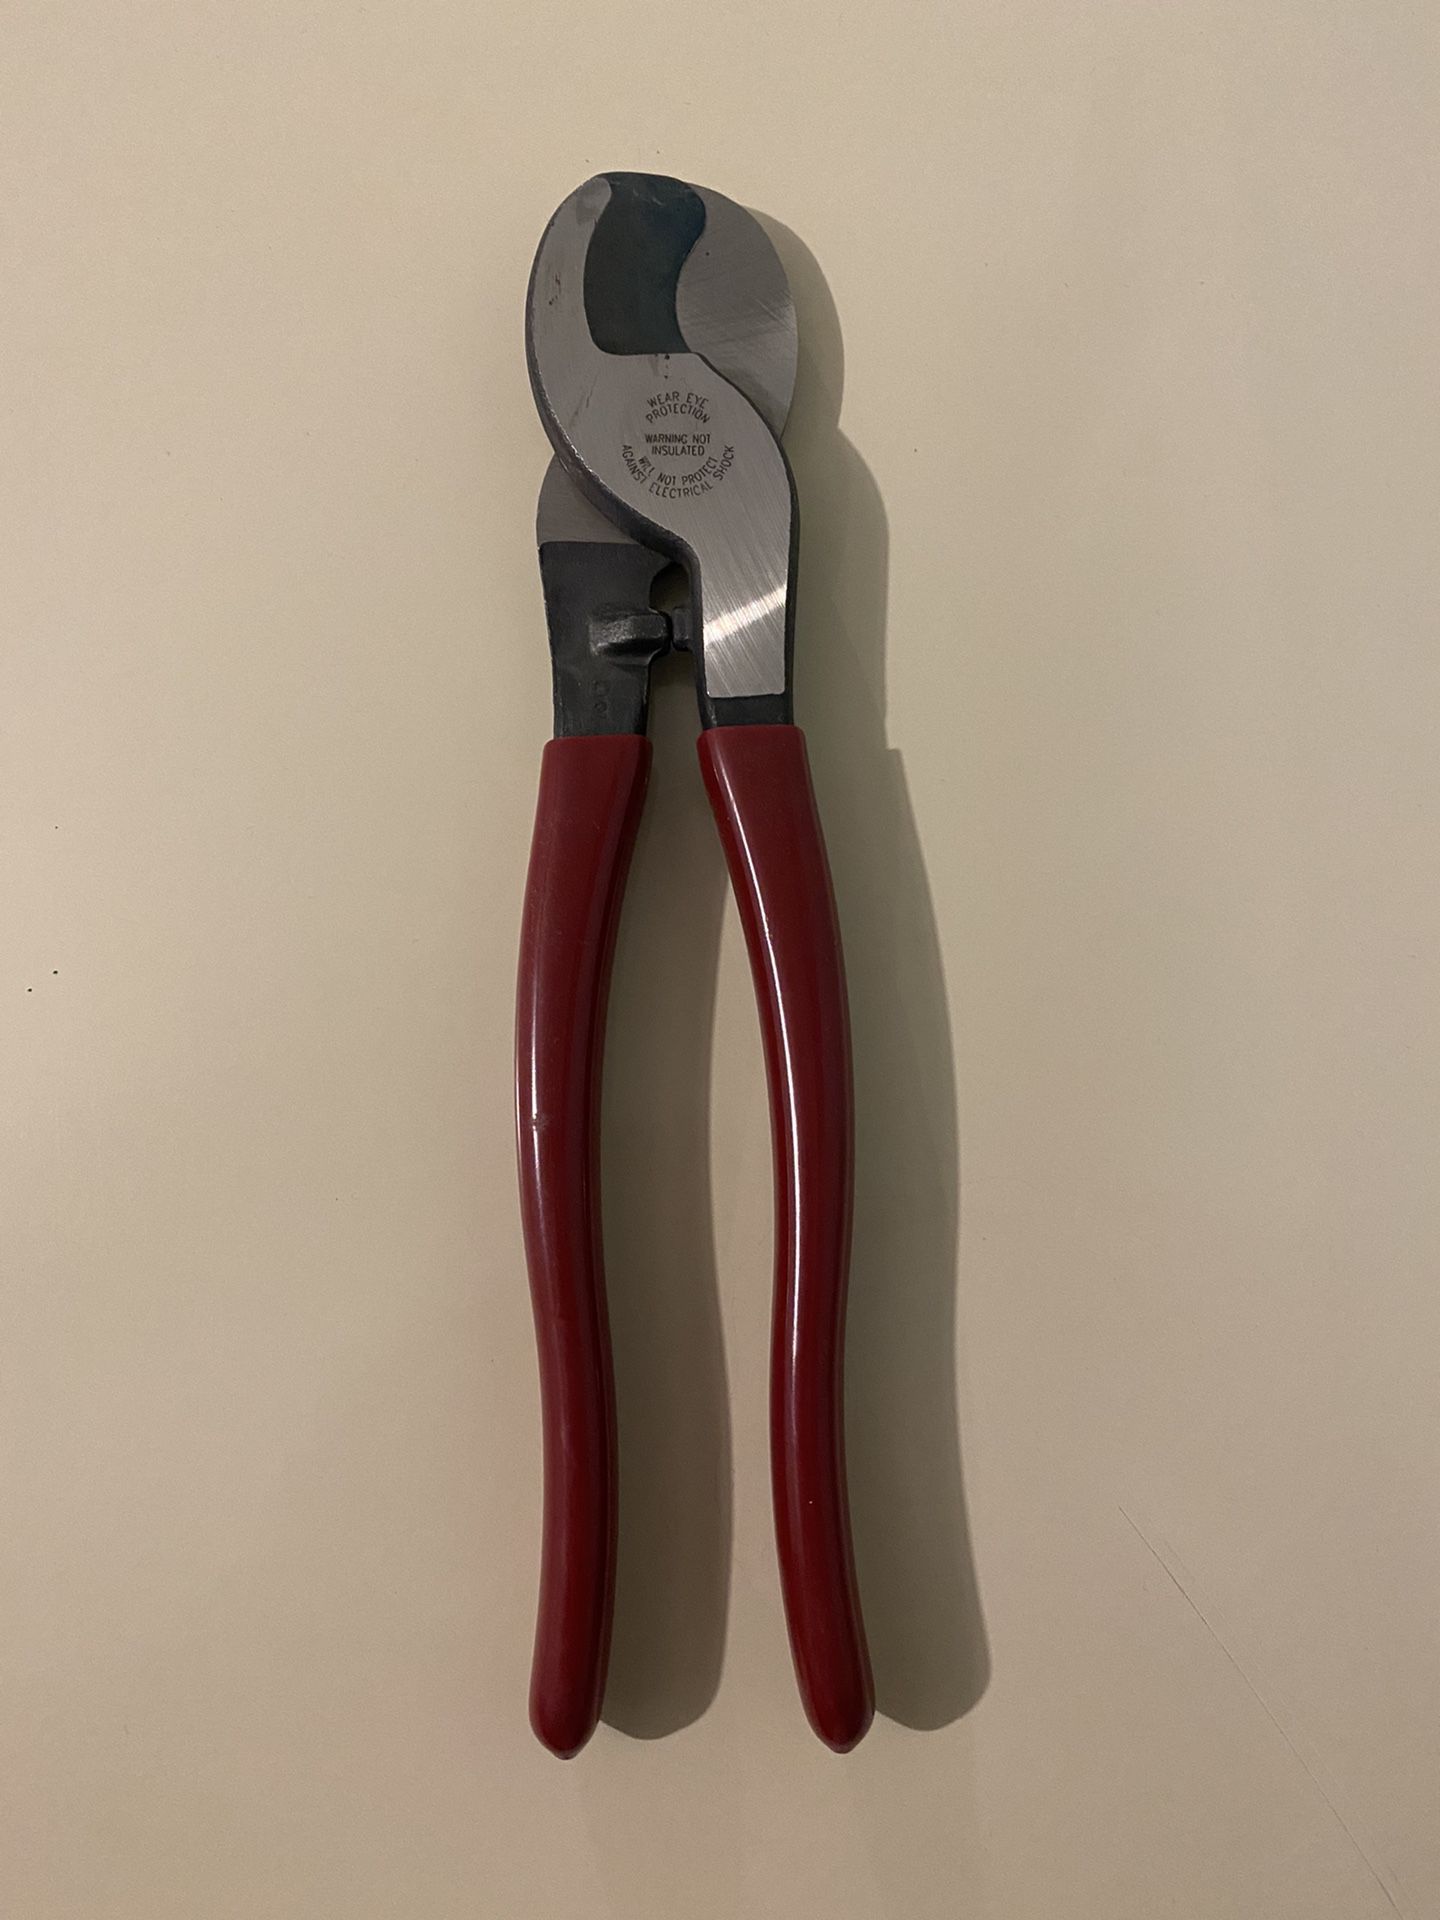 Klein Tools High-Leverage Cable Cutter